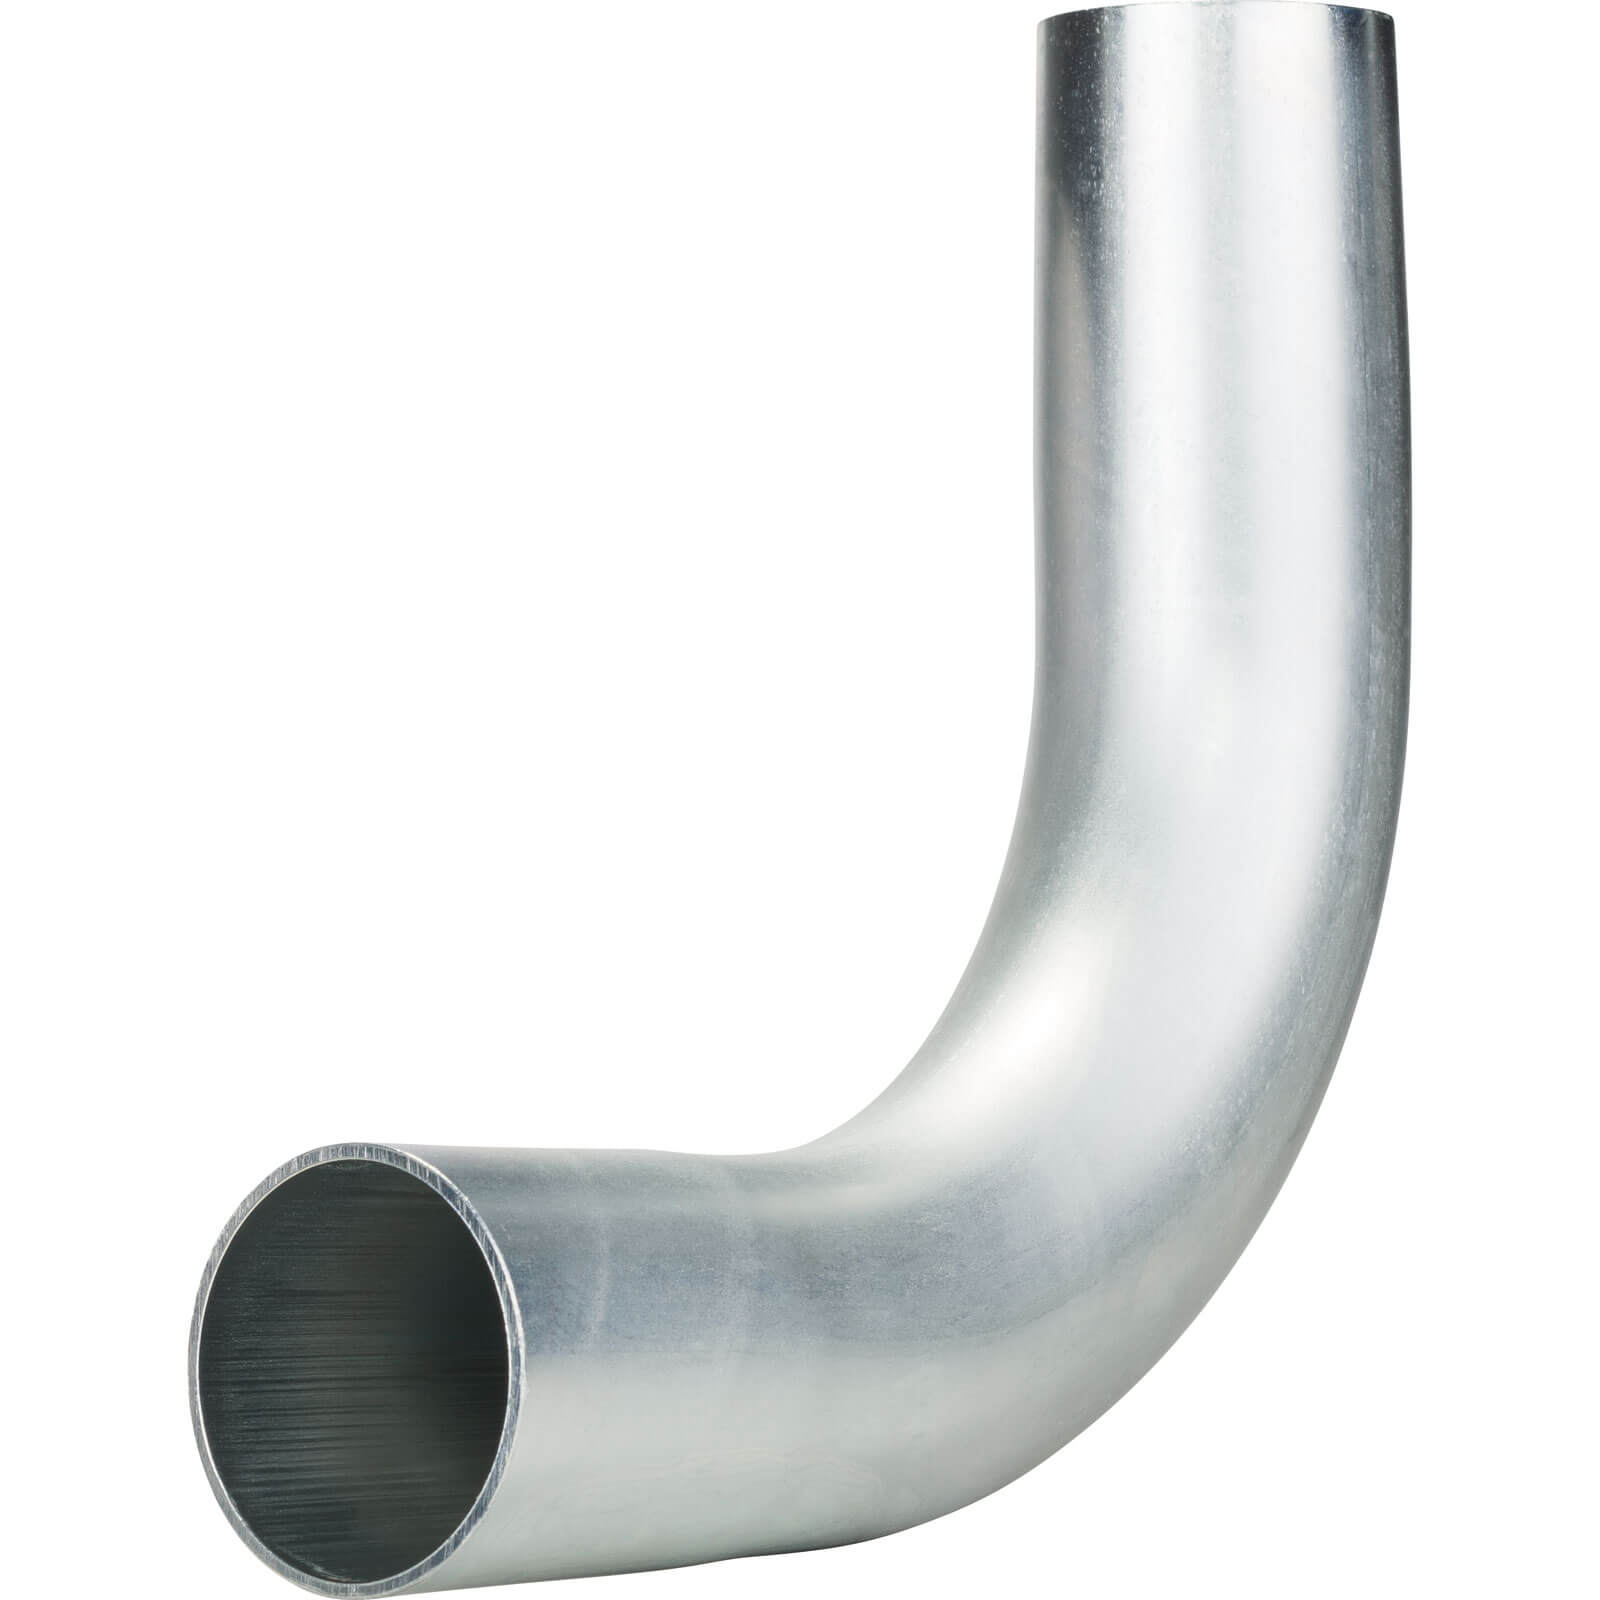 Photo of Bosch Dust Extractor Elbow Pipe For 35mm Hoses